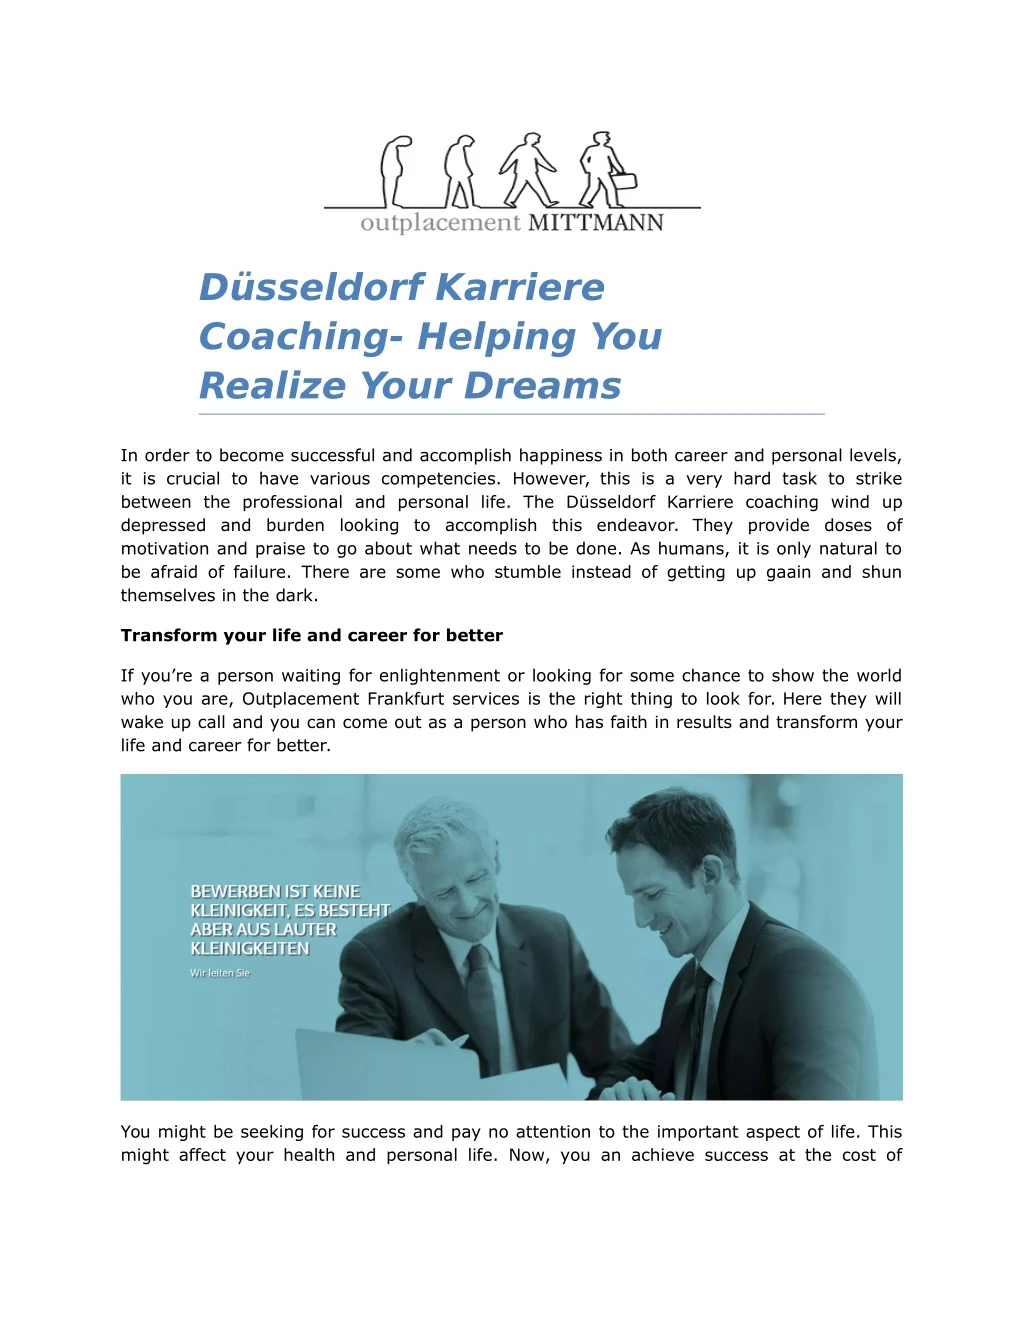 d sseldorf karriere coaching helping you realize